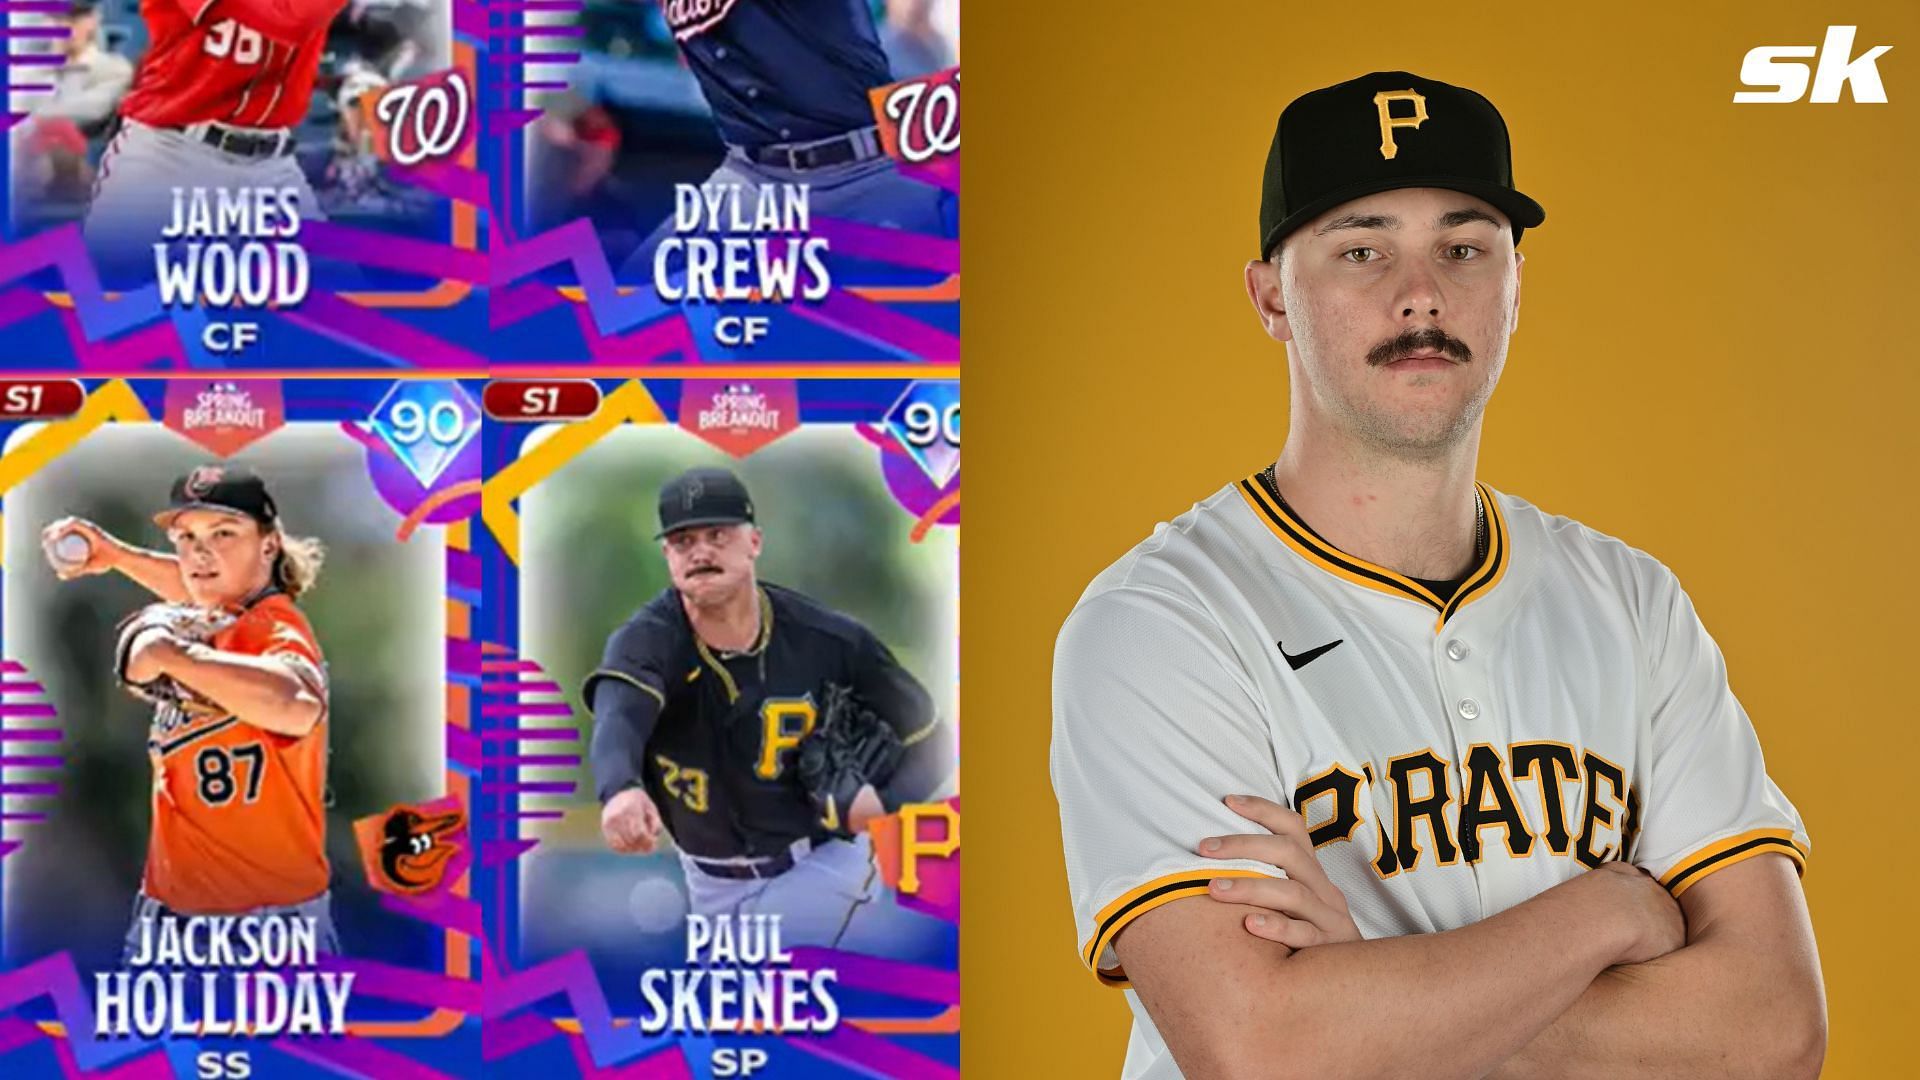 Ranking the best Spring Breakout cards available to players ahead of anticipated release